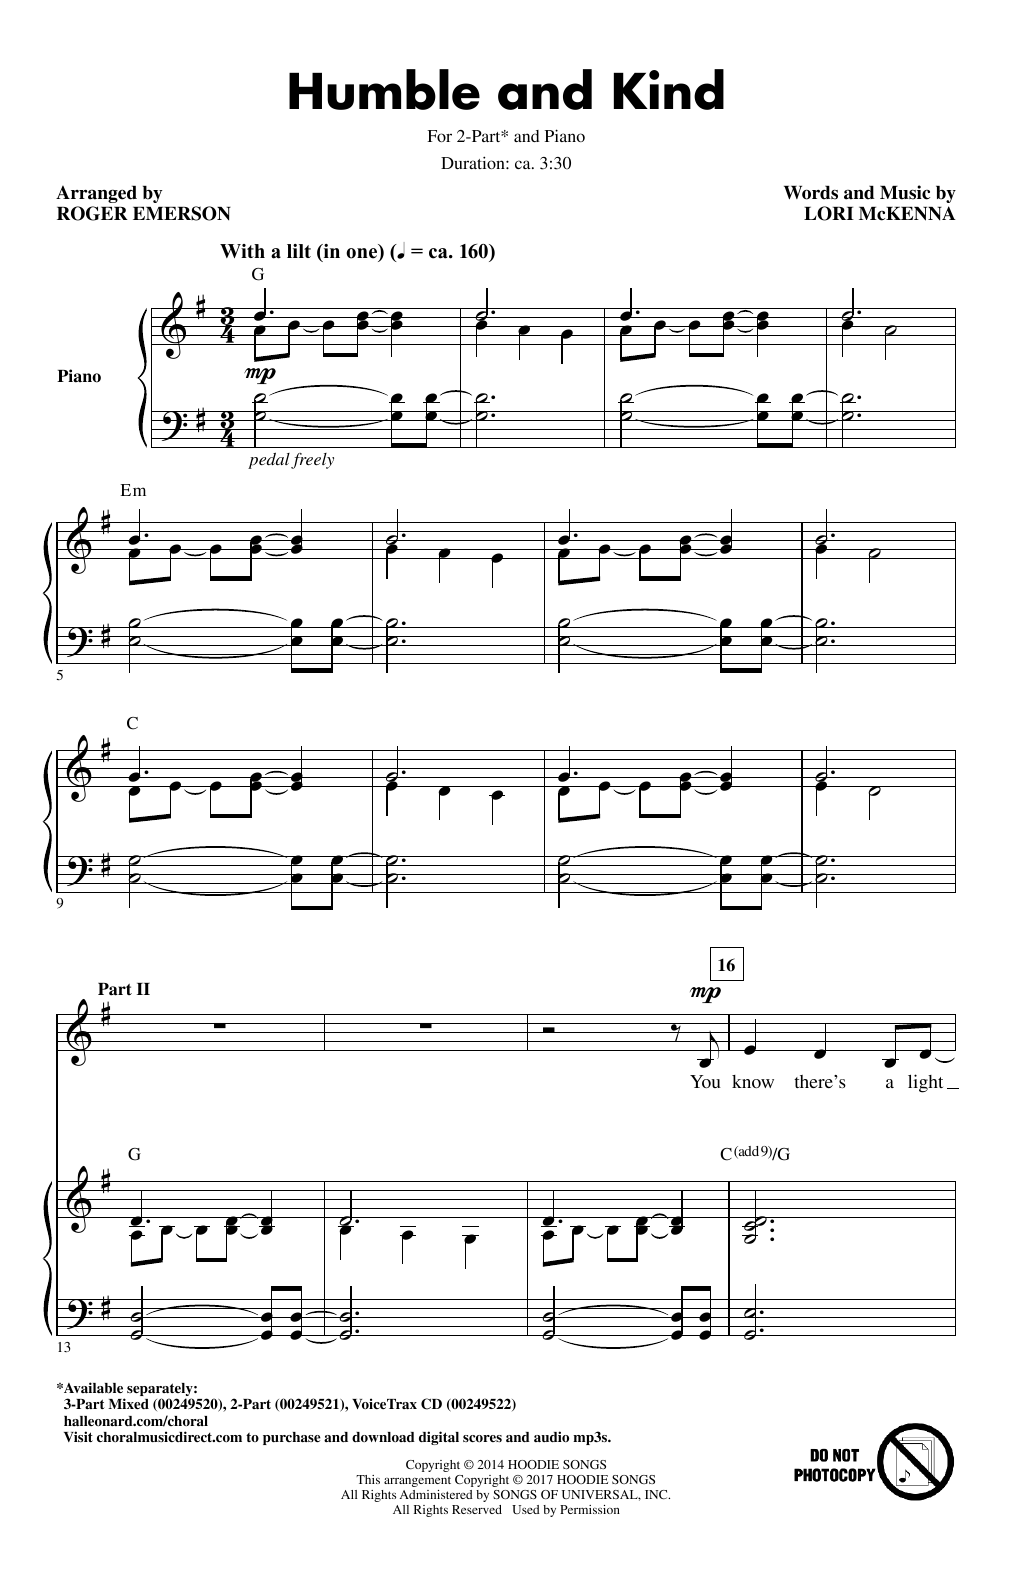 Download Tim McGraw Humble And Kind (arr. Roger Emerson) Sheet Music